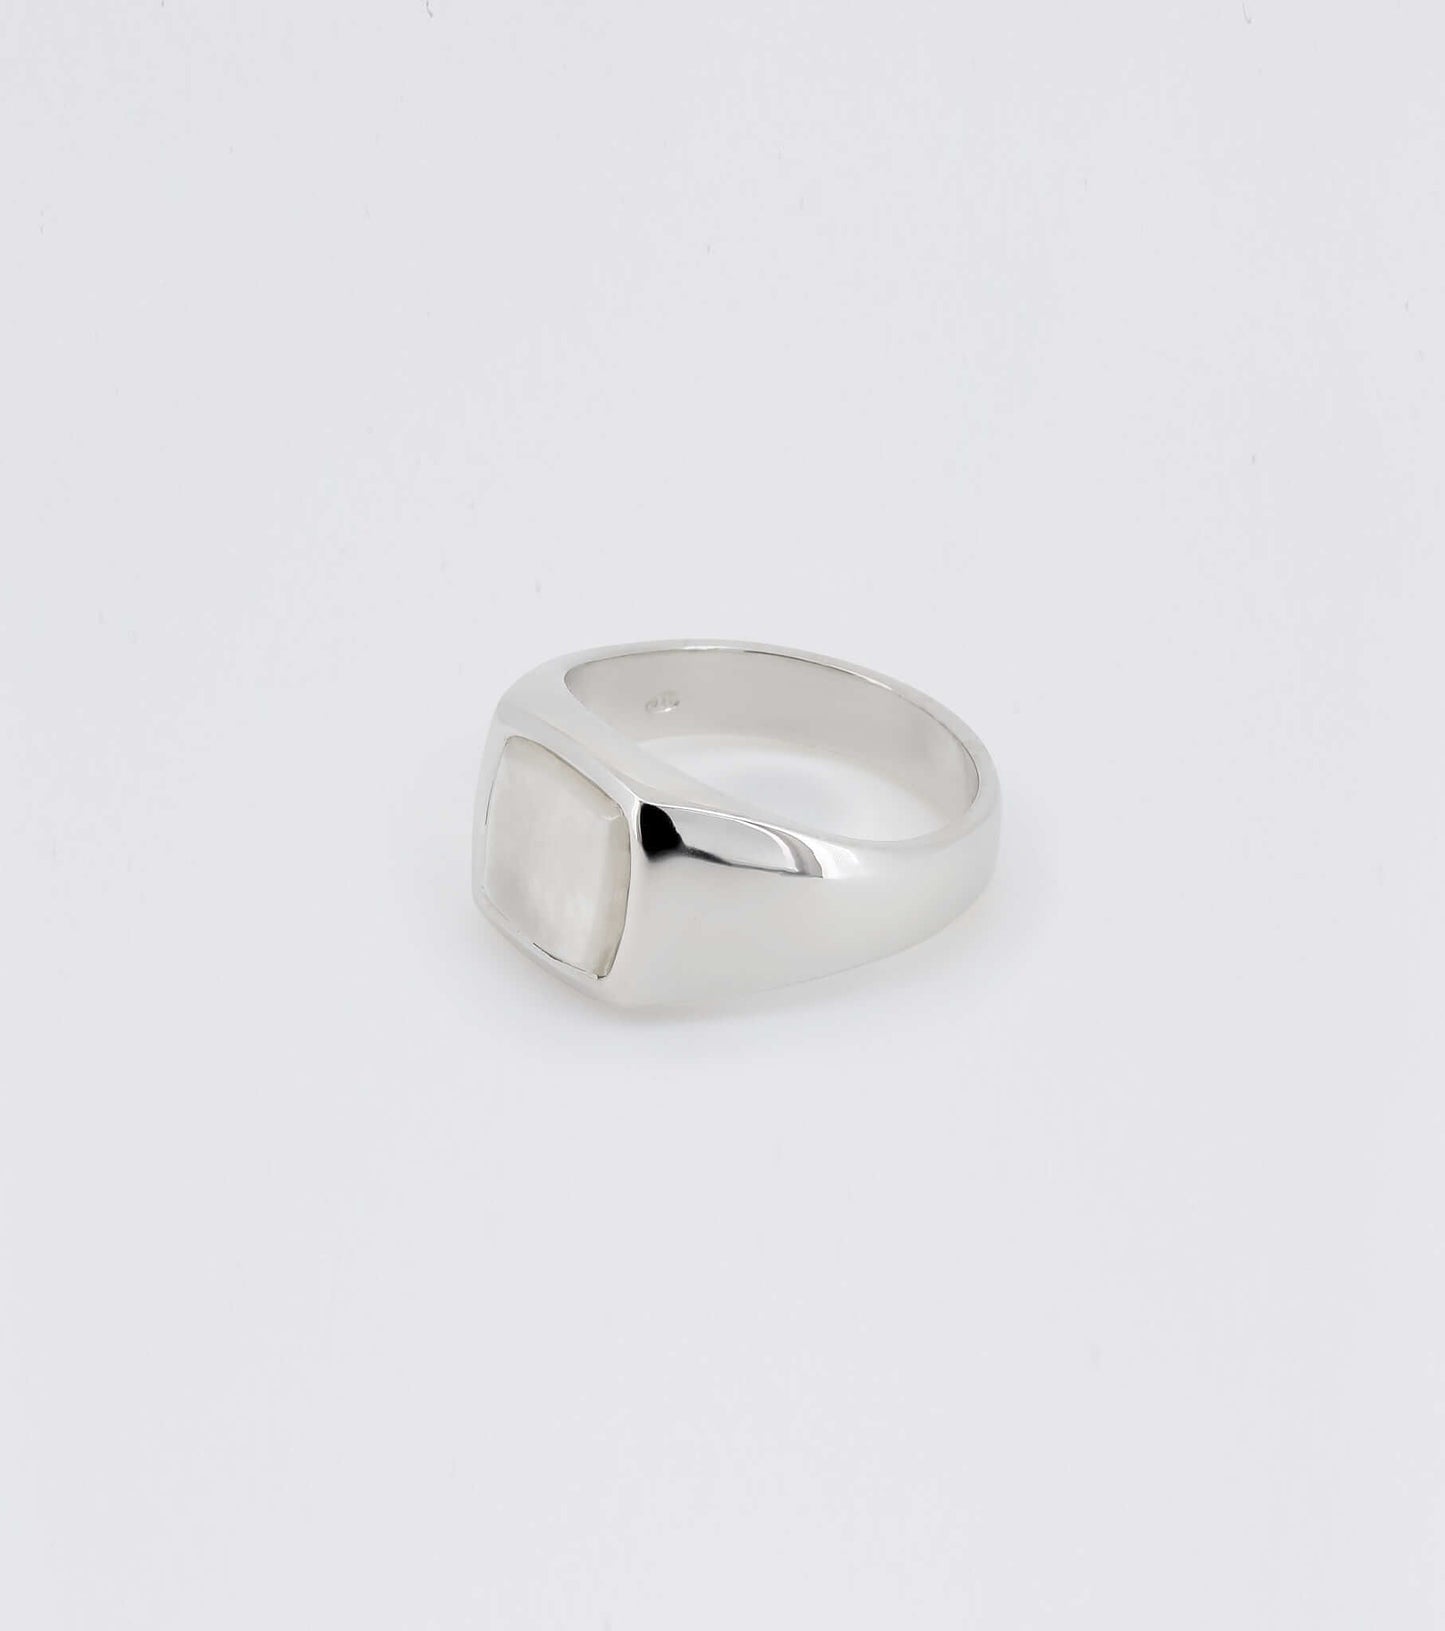 Beveled Mother of Pearl Signet Ring - Sar Jewellery